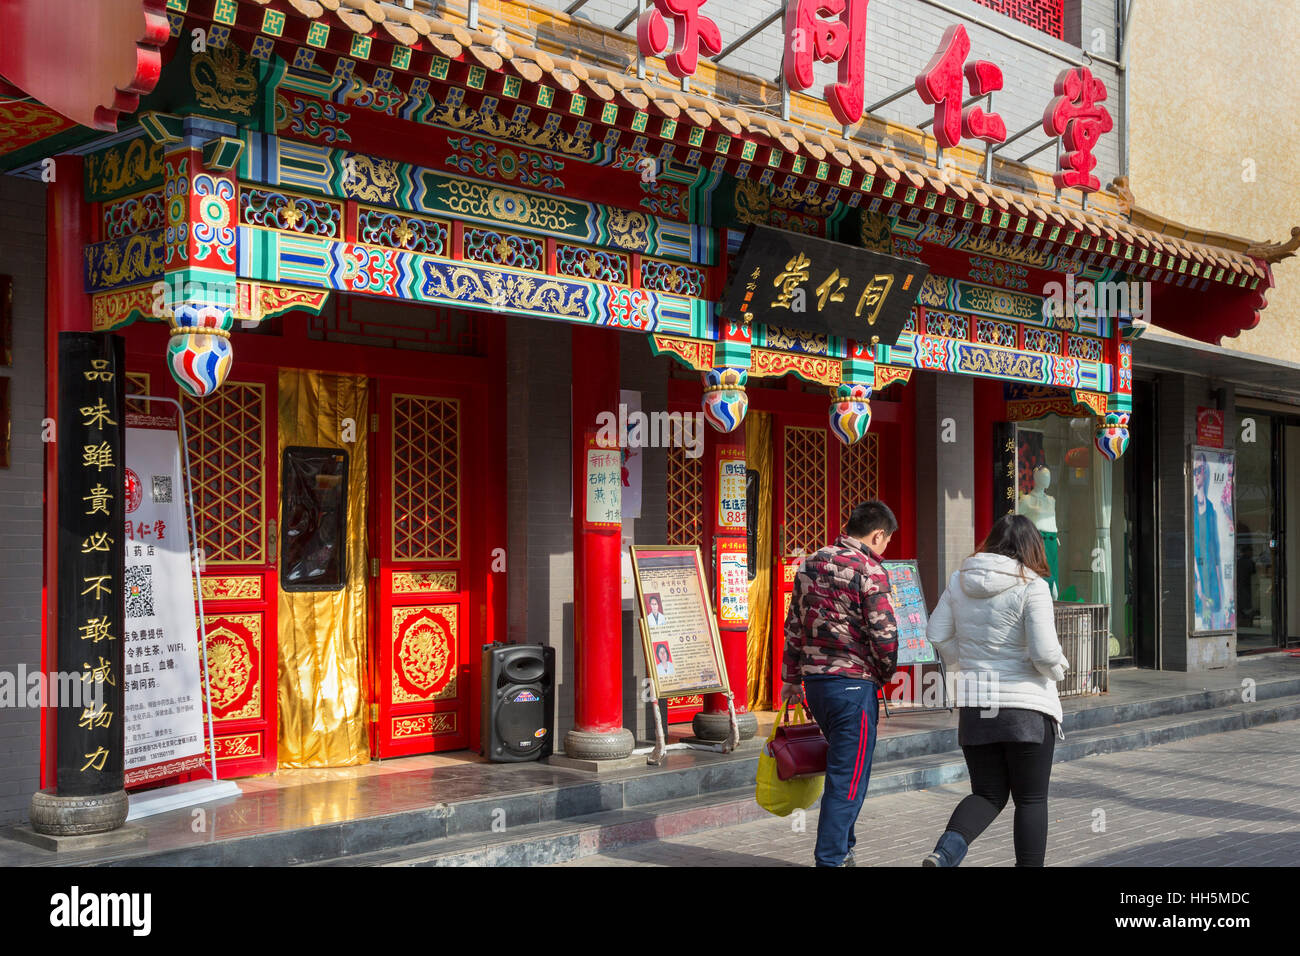 Front of Chinese building, Yinchuan, Ningxia province, China Stock Photo